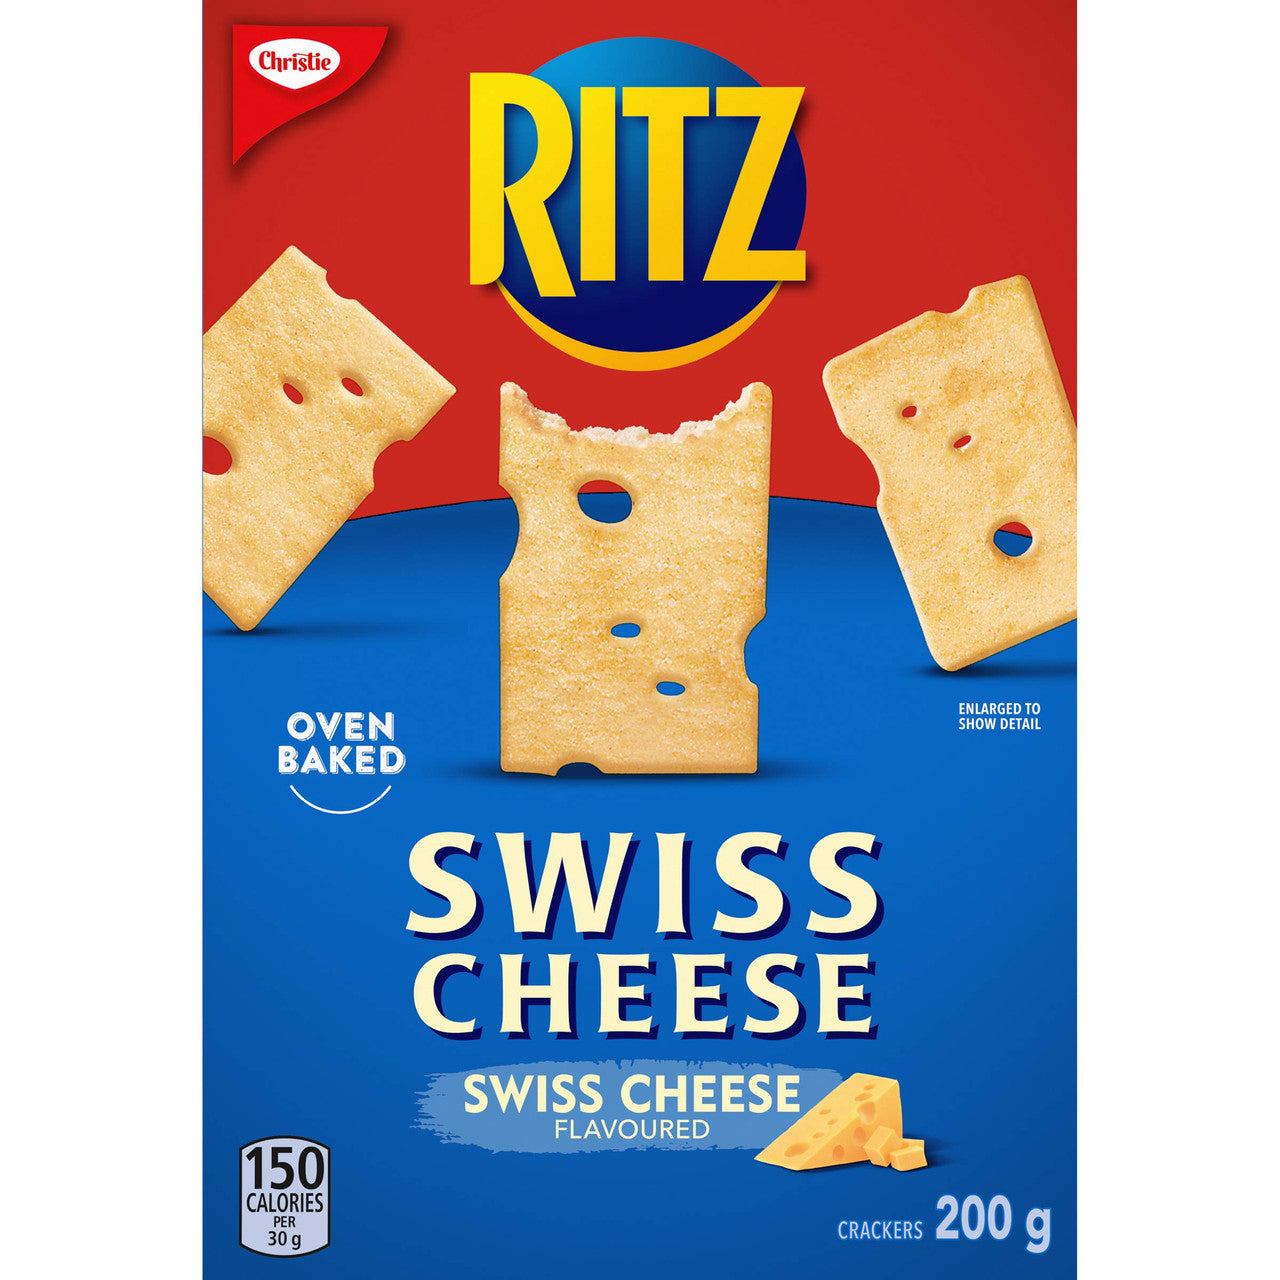 Christie RITZ SWISS CHEESE Flavoured Crackers, 200g/7.1oz., {Imported from Canada}